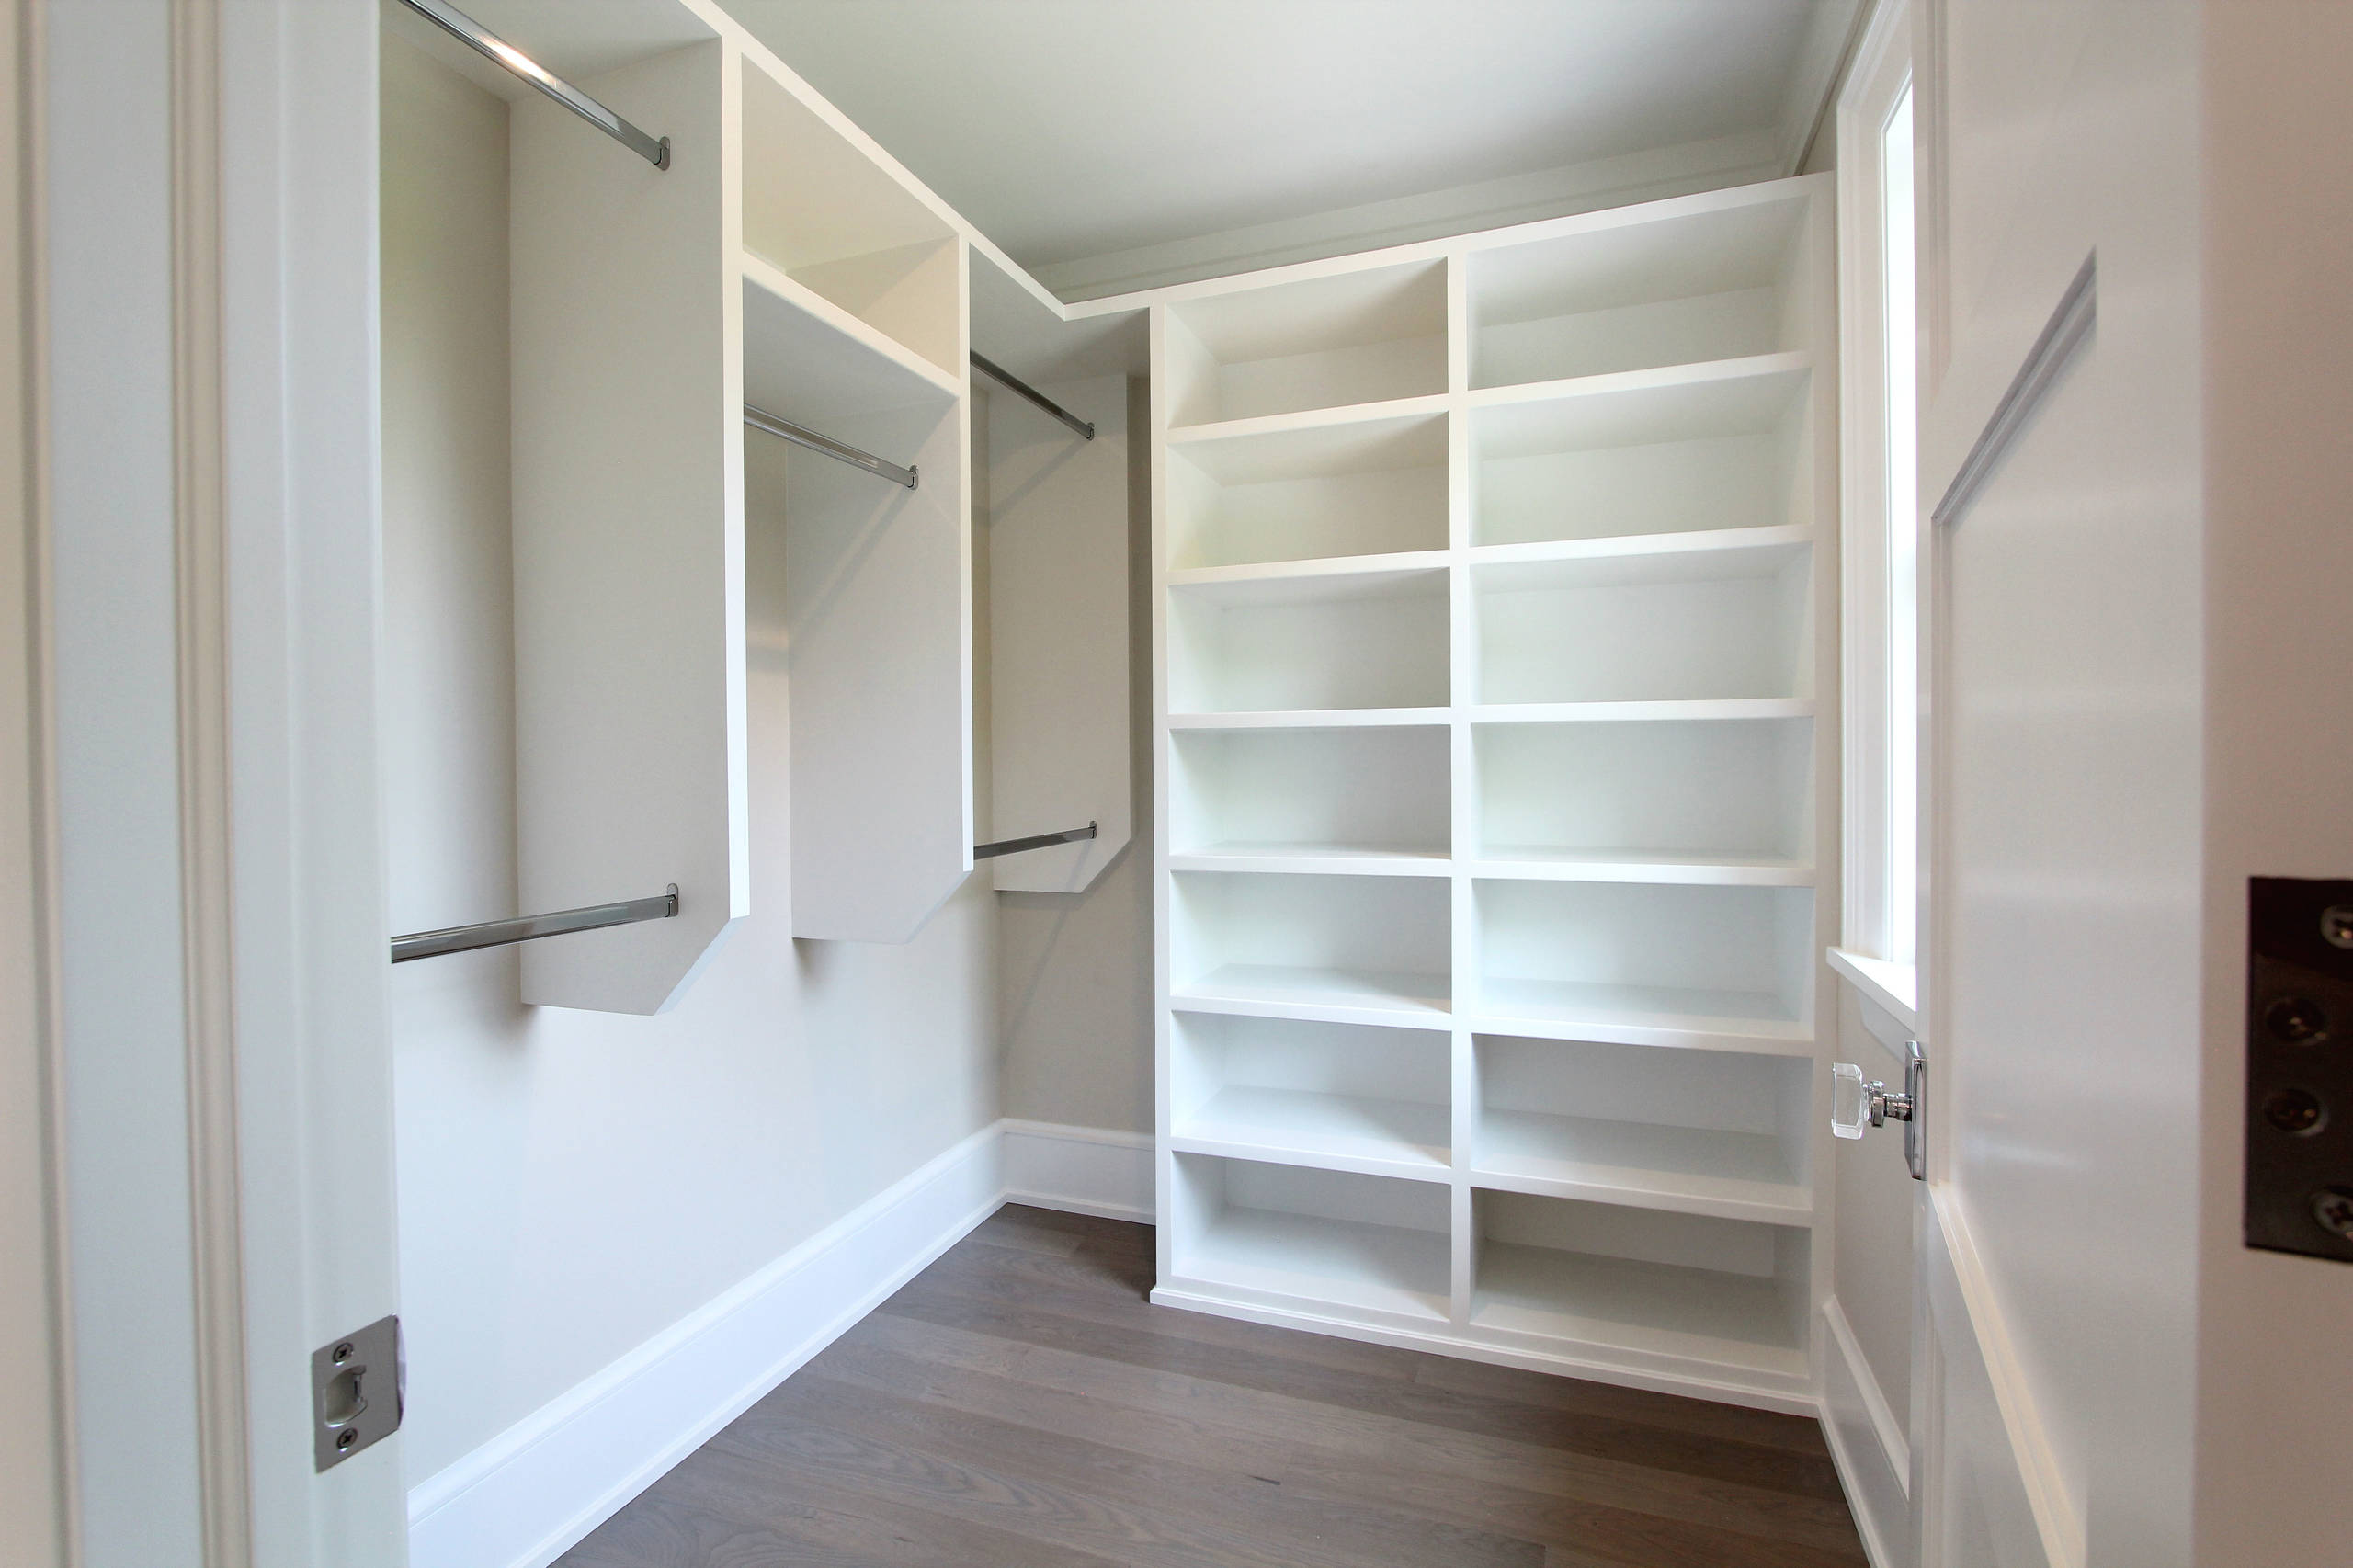 75 Beautiful Small Walk In Closet Pictures Ideas Houzz